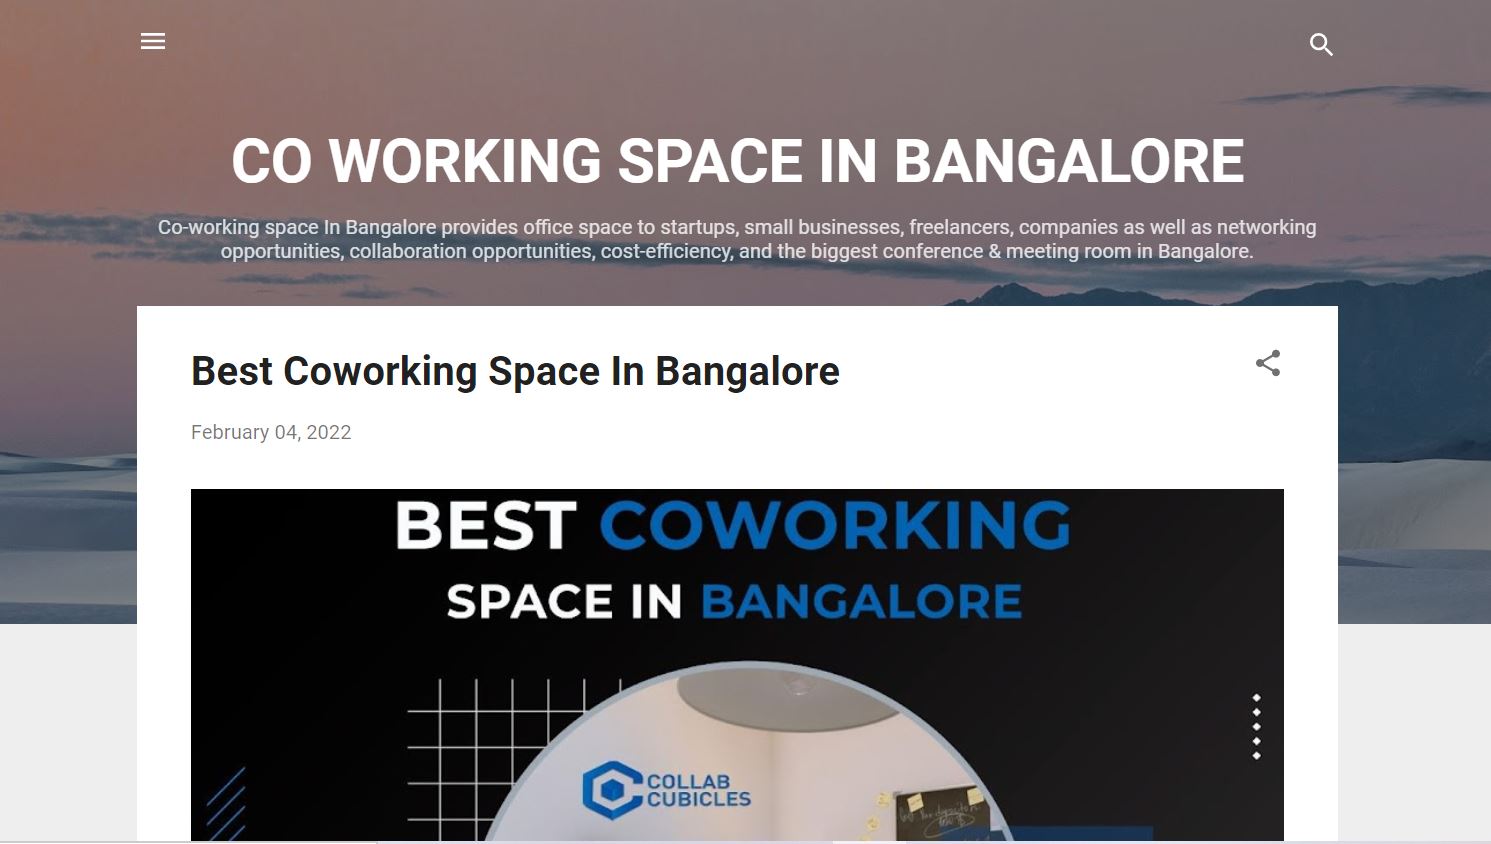 CO working space in bangalore